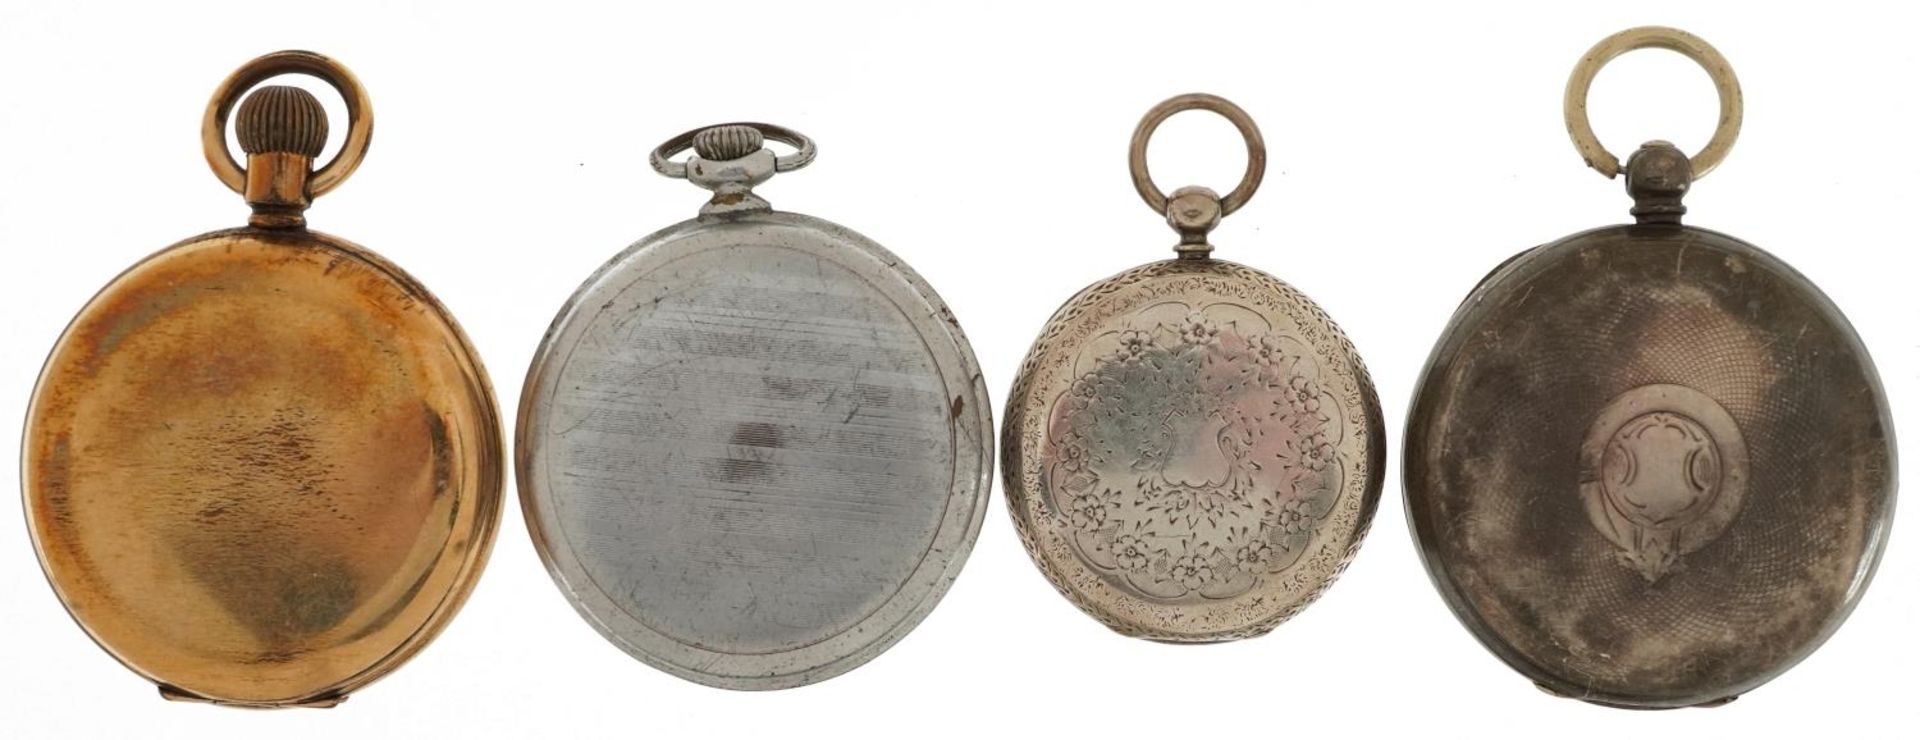 Four pocket watches including a gentlemen's silver Kendal & Dent open face pocket watch, ladies - Image 3 of 7